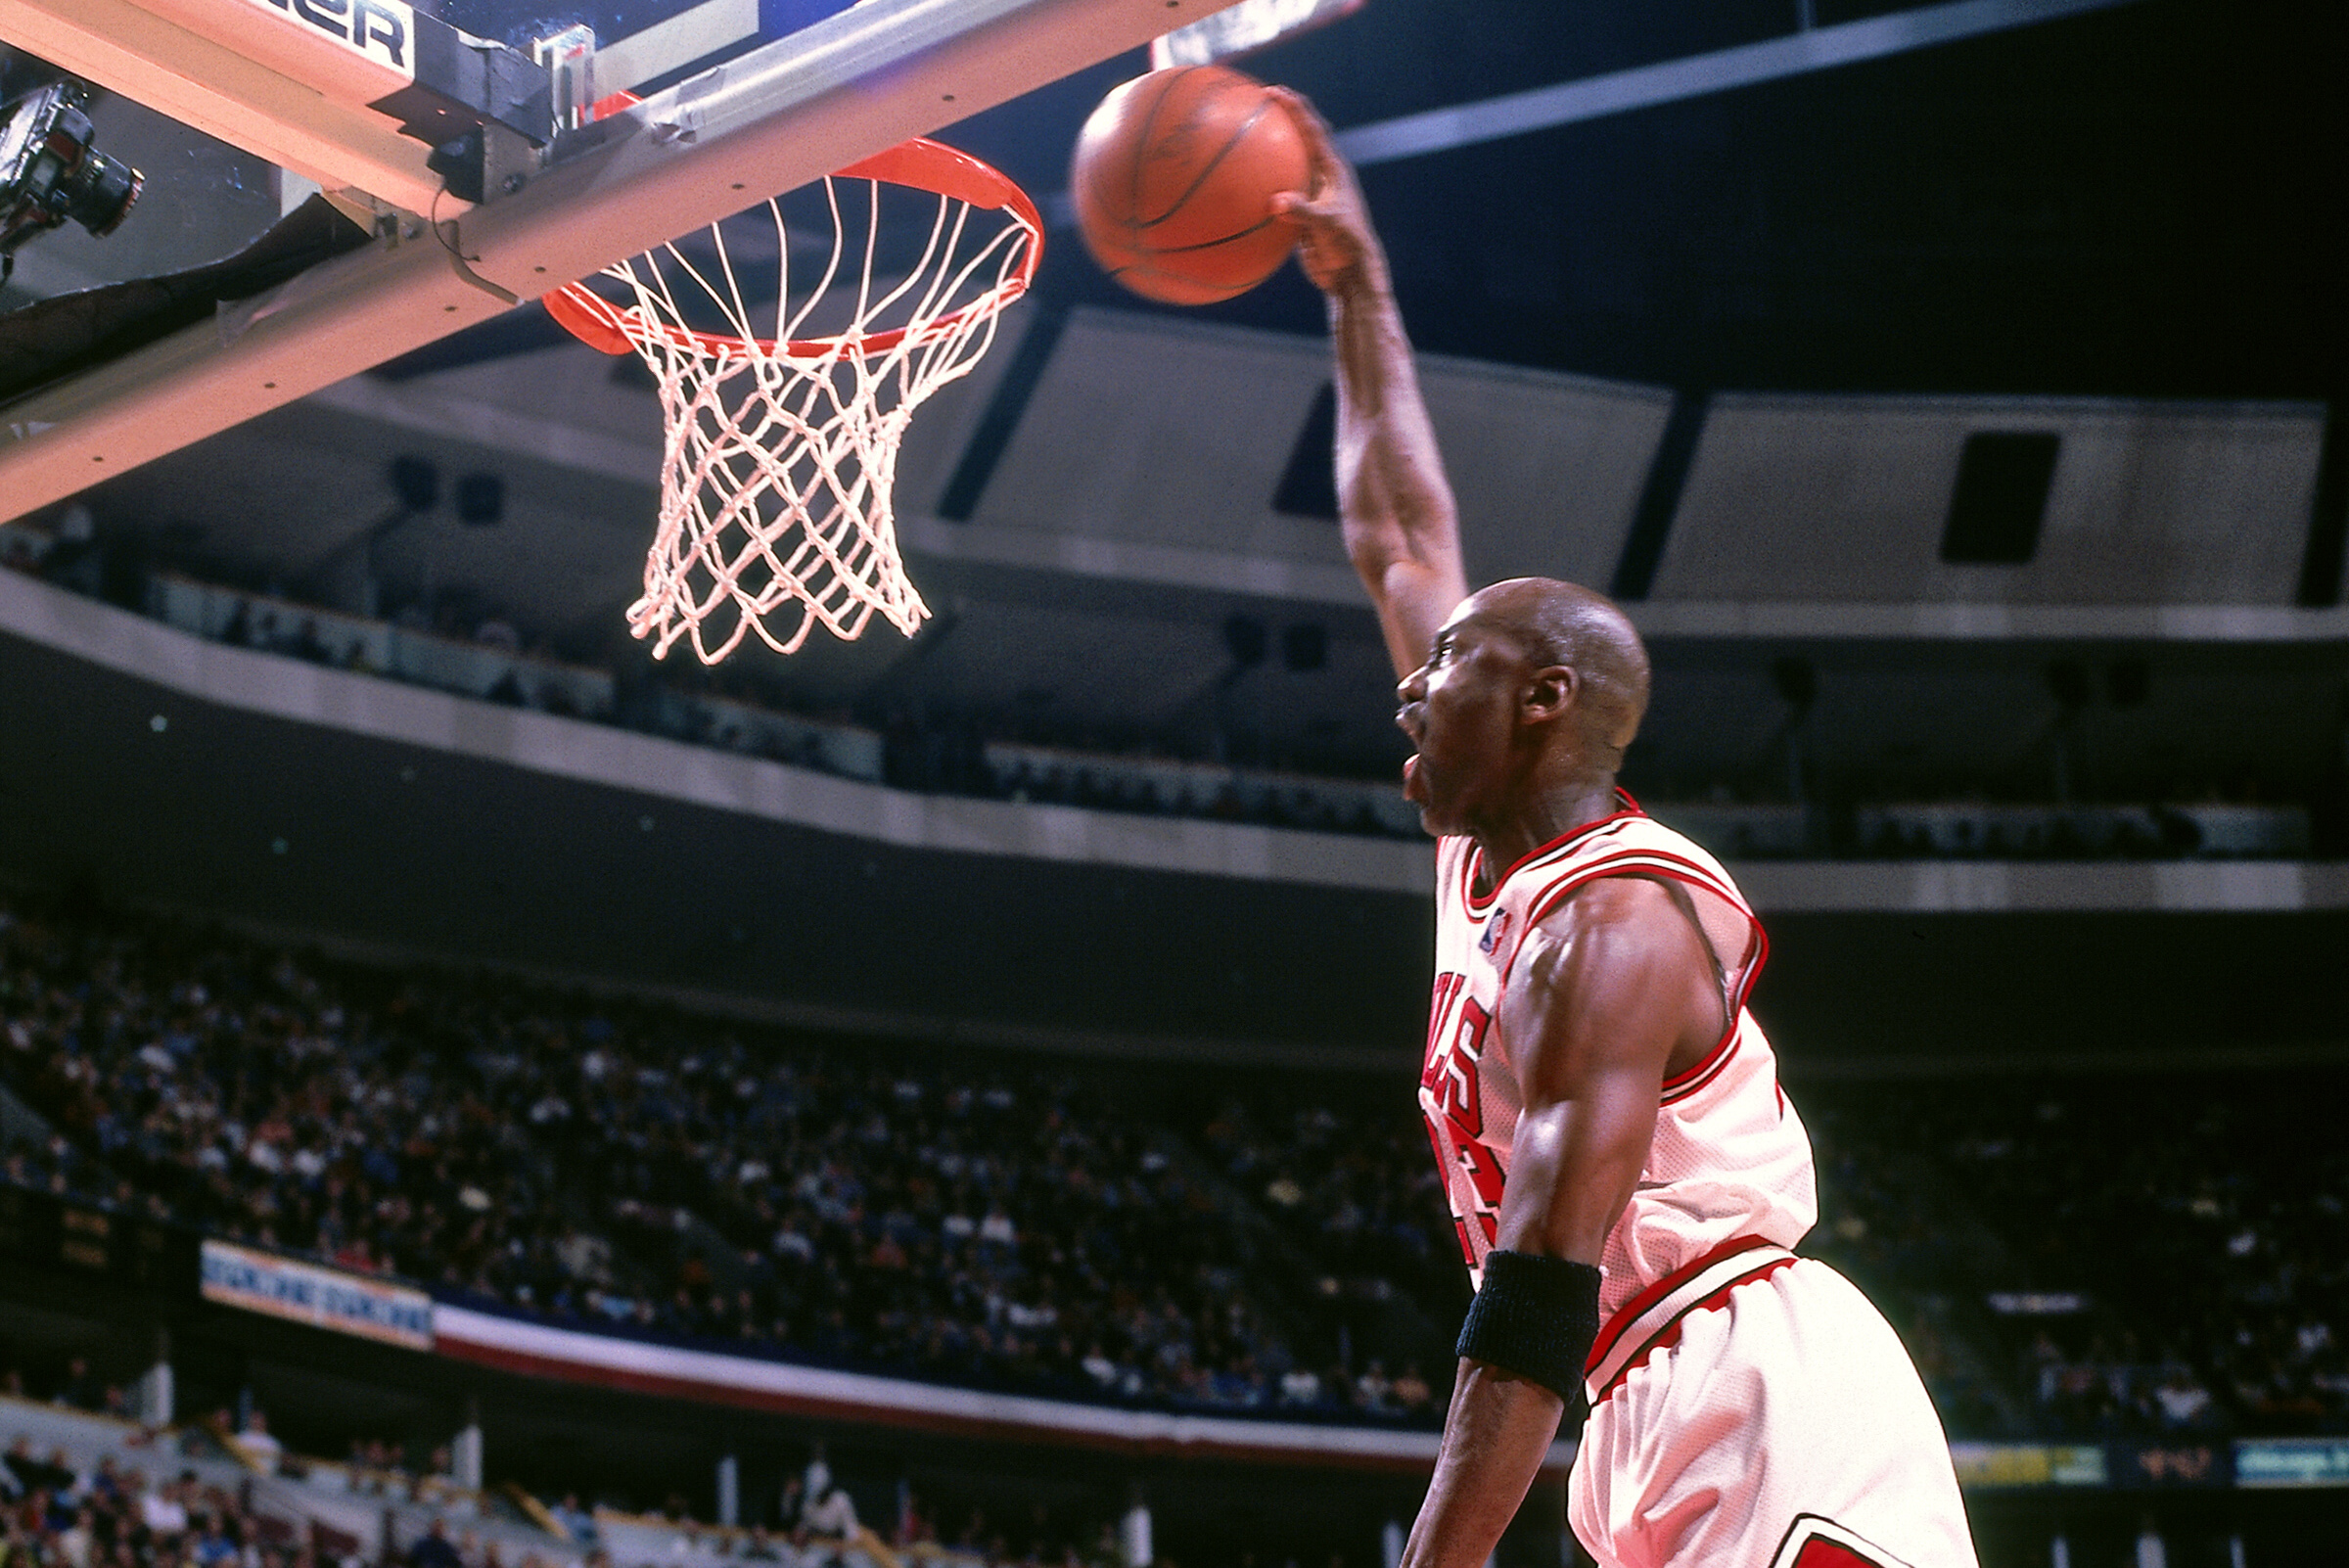 Michael Jordan 1997 Bulls Jersey Sells for $288K at Auction Report | Latest News, Videos and